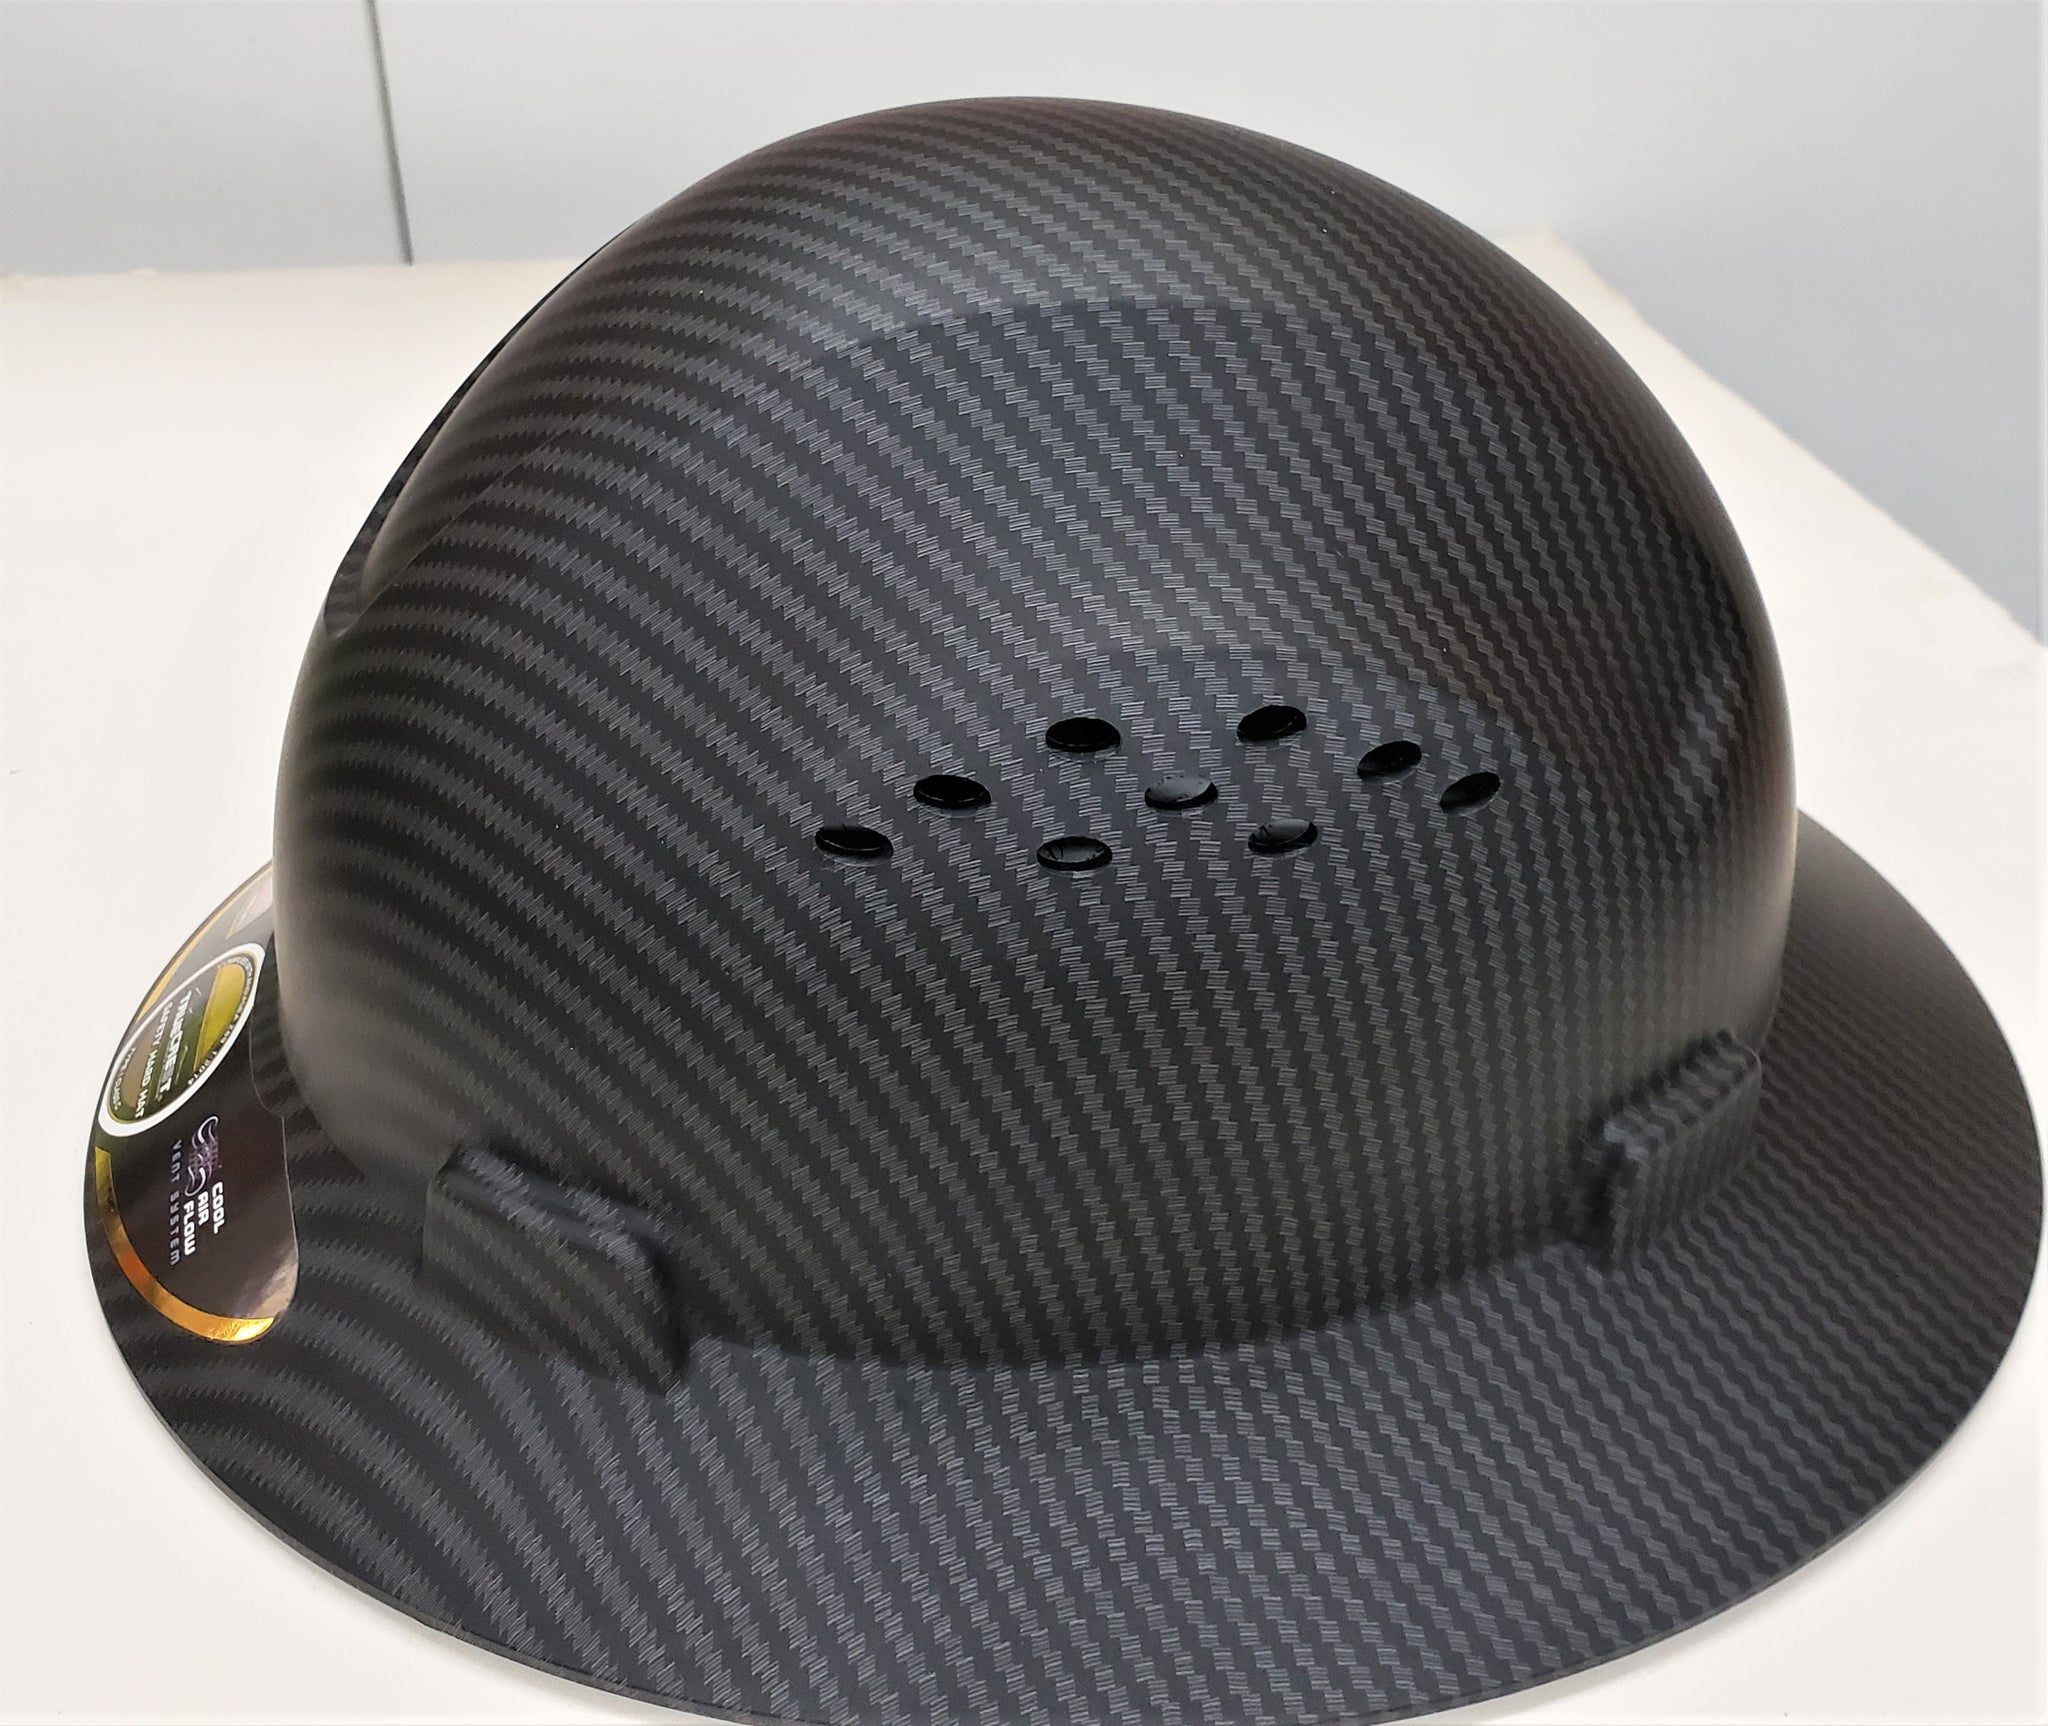 Matte Black Hydro Dipped Full Brim Hard Hat with Fas-trac